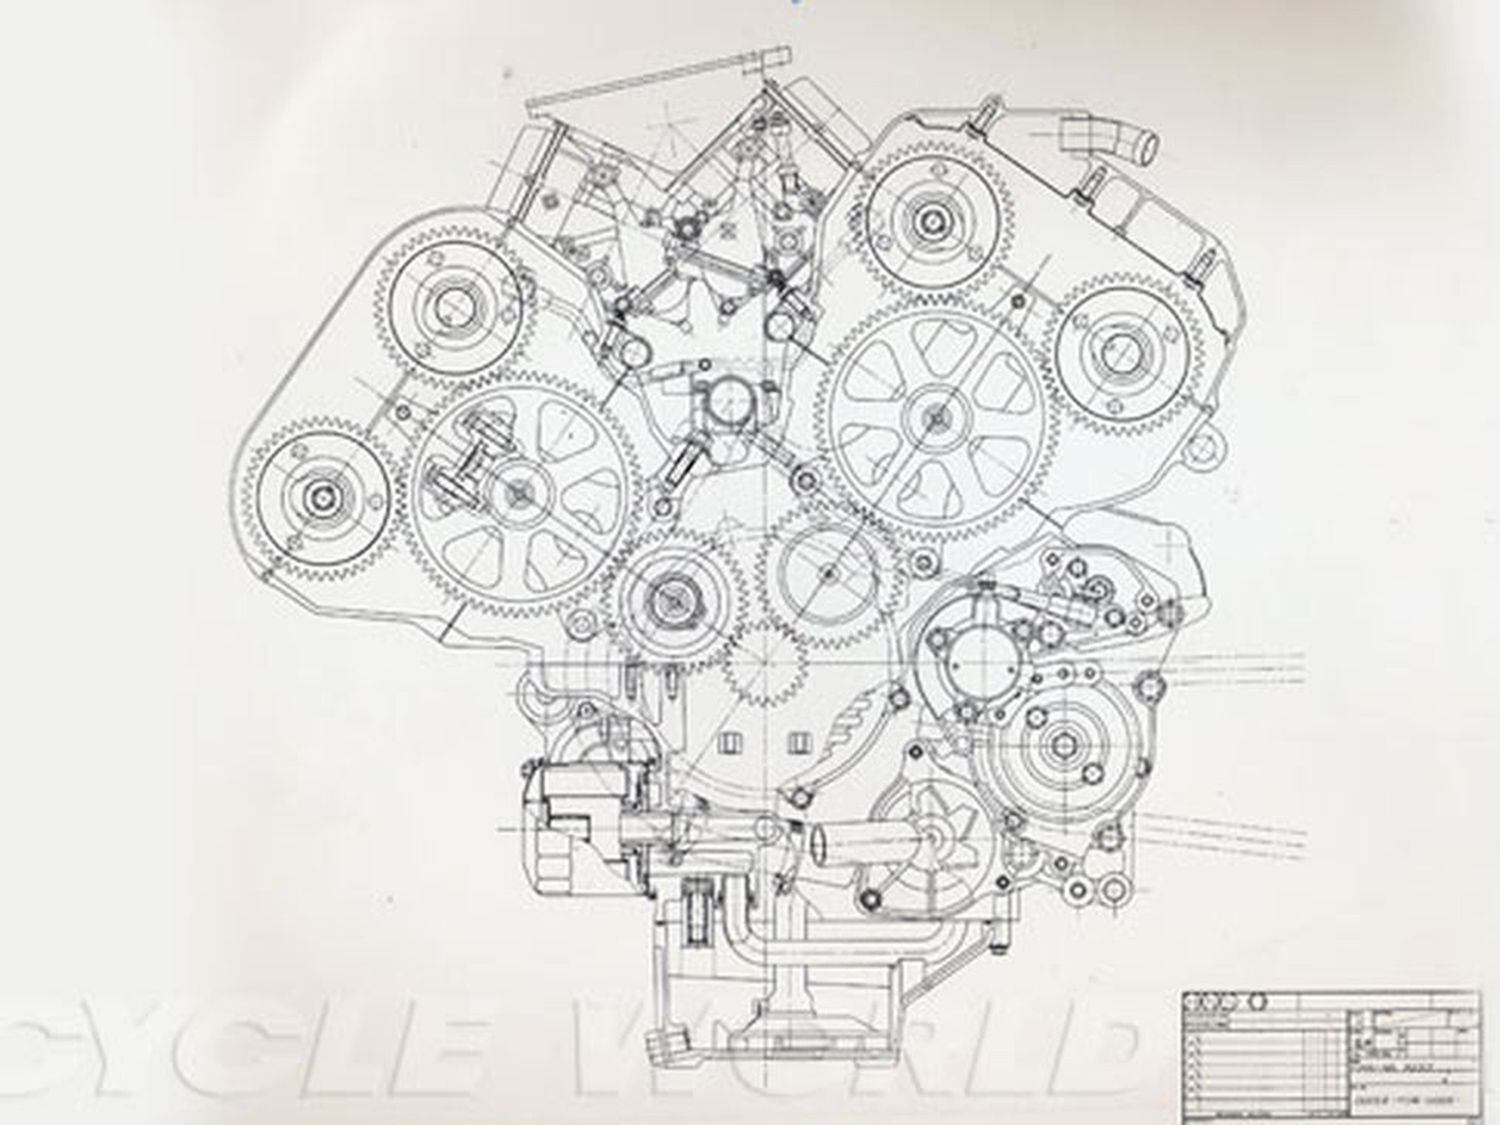 Layout of the 1985 VFR1000R’s camshaft gear drive.